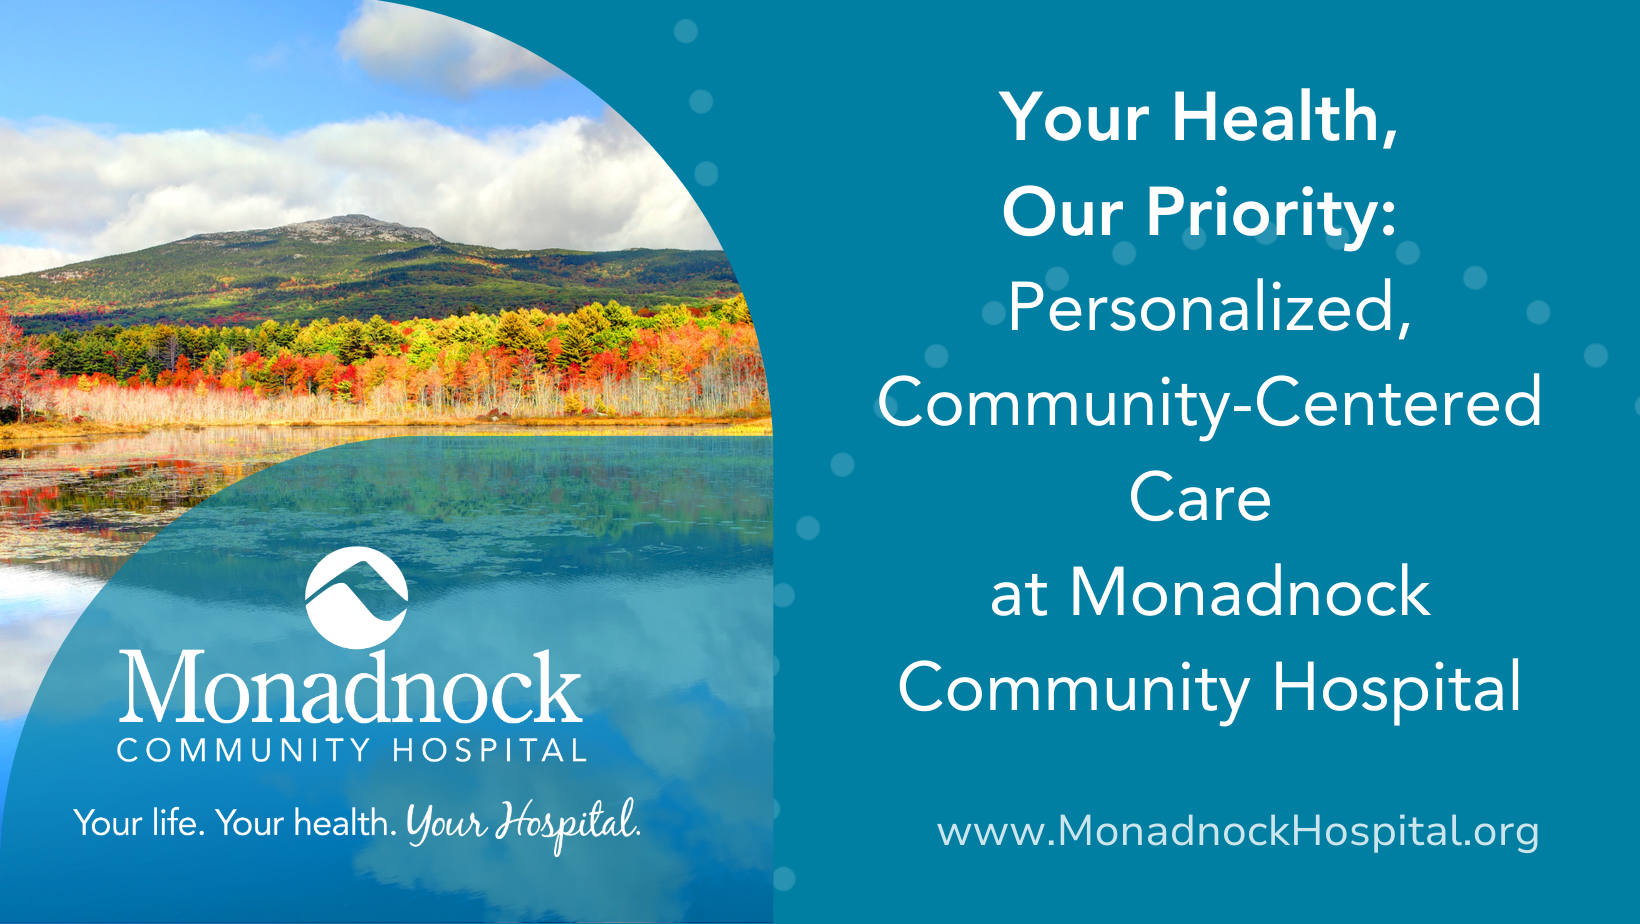 Your health our priority personalized community centered care at mch